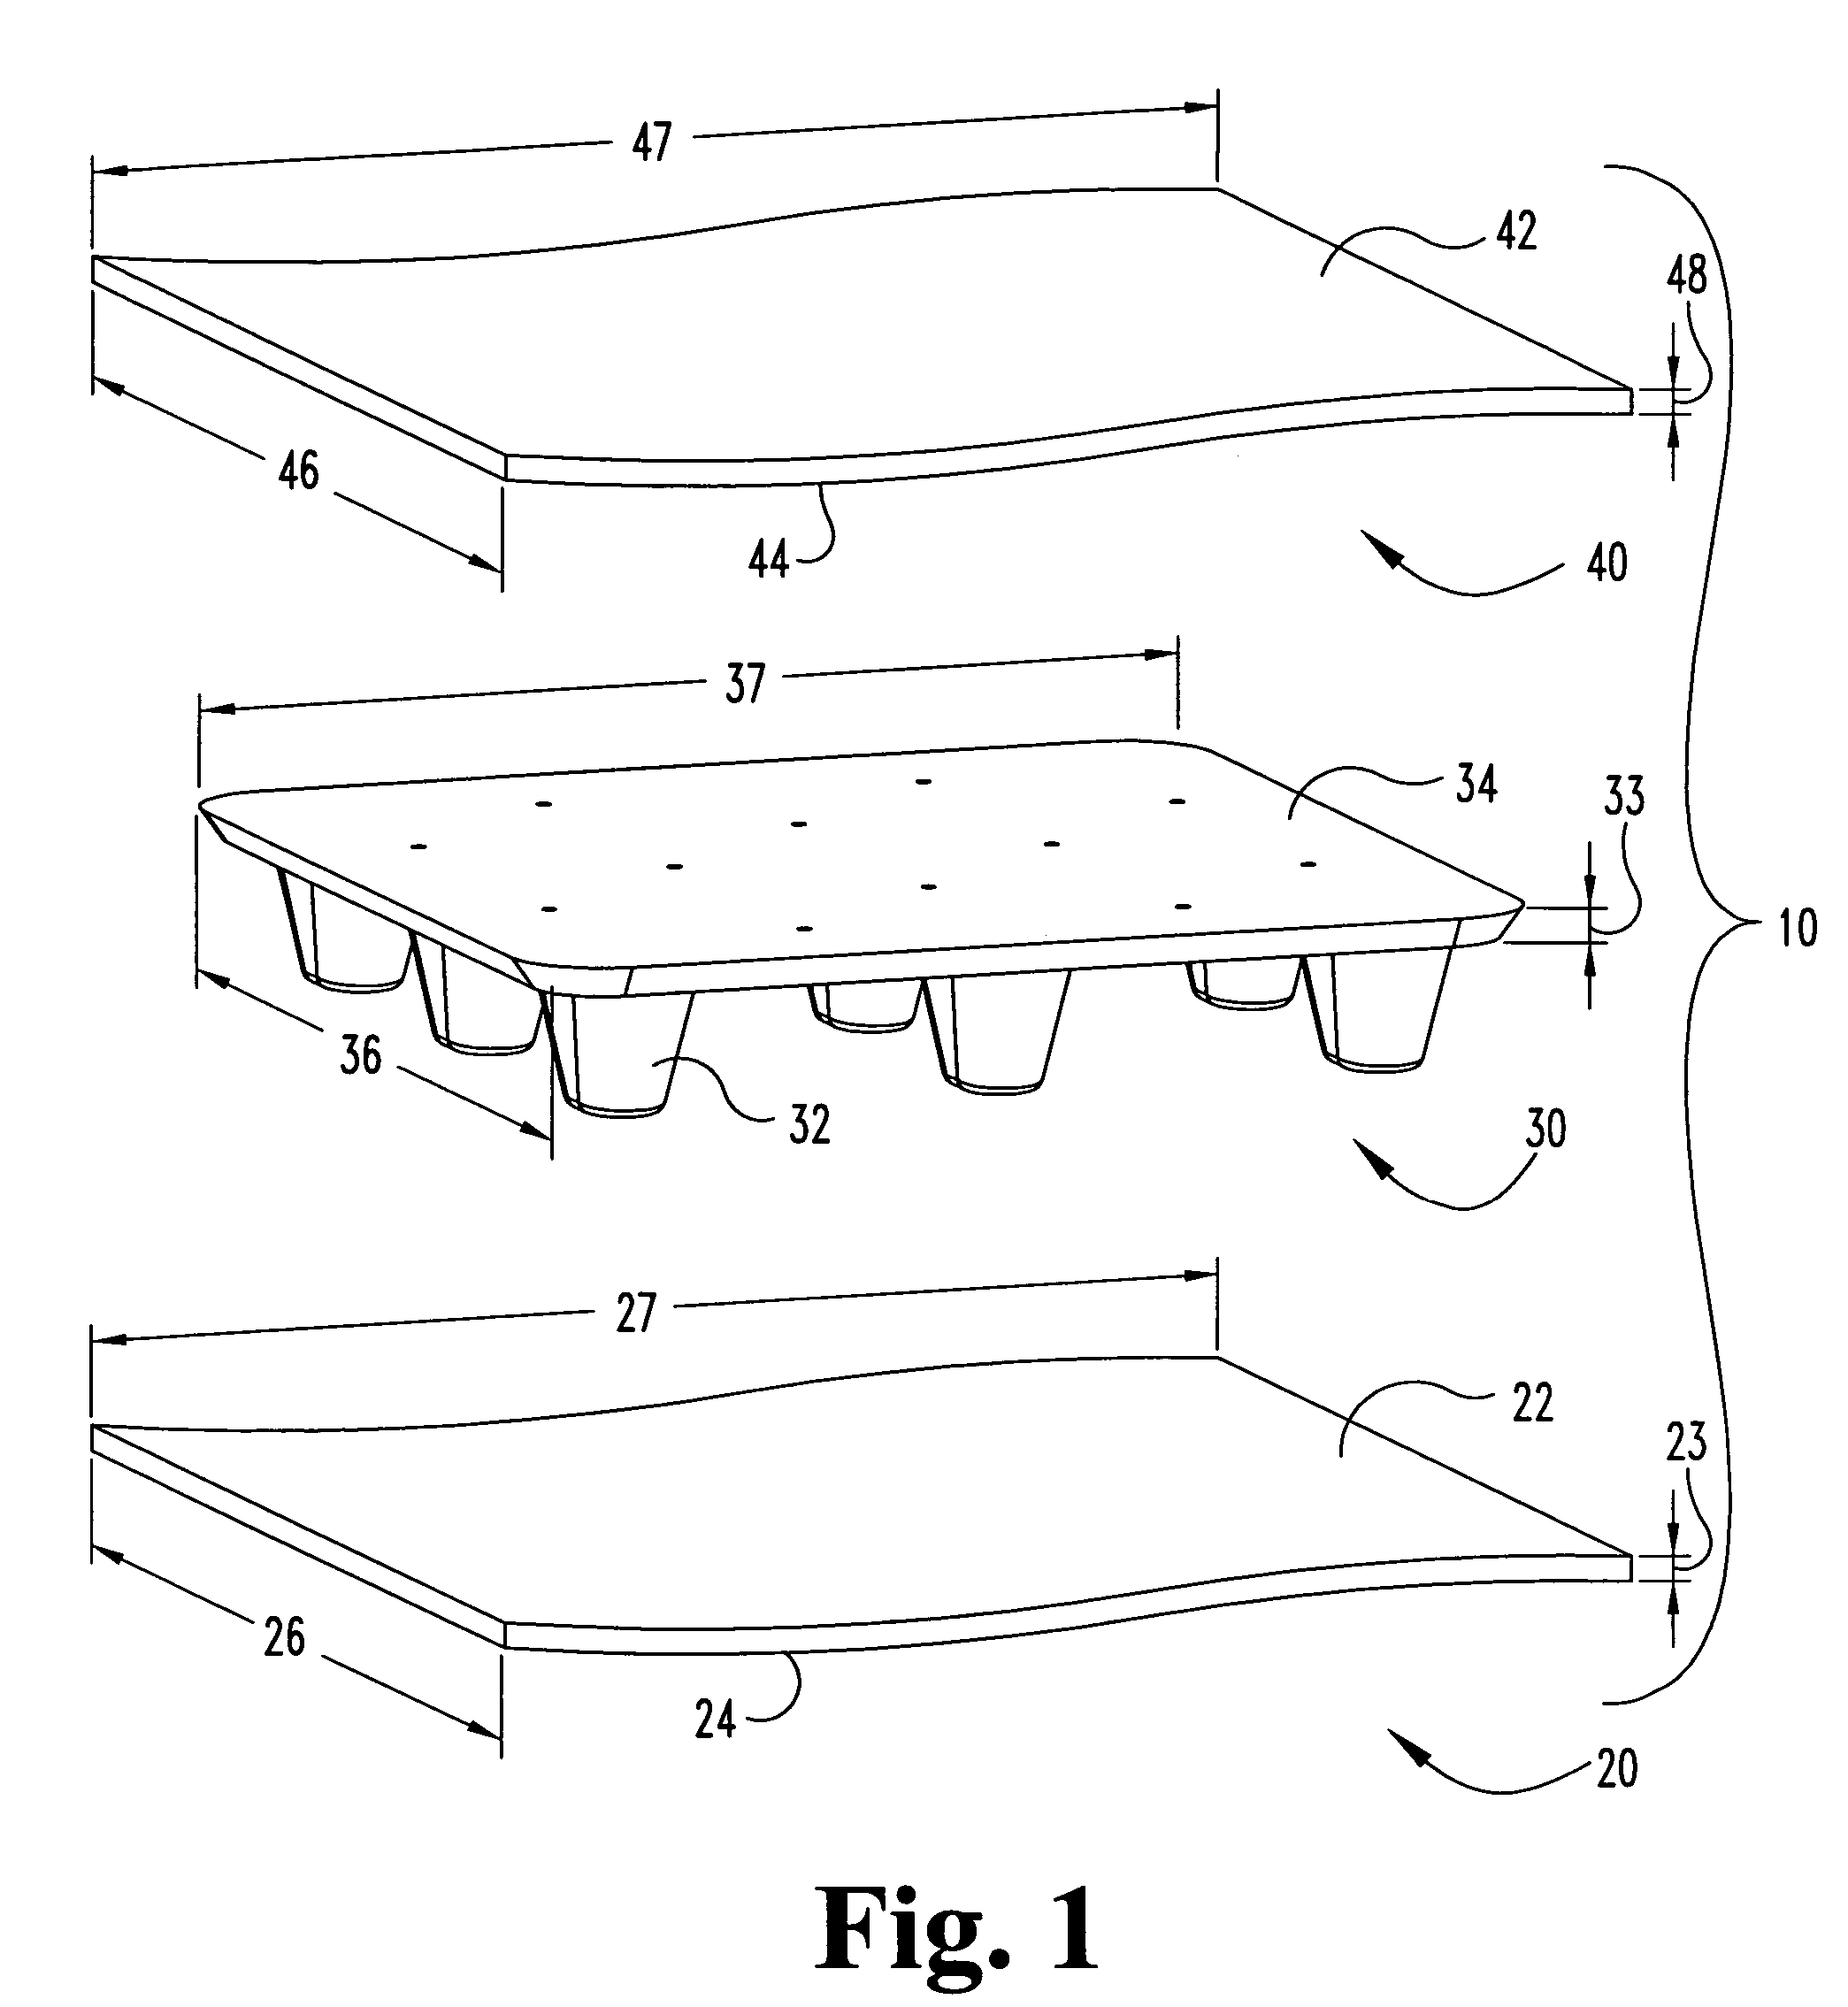 Method of molding load-bearing articles from compressible cores and heat malleable coverings